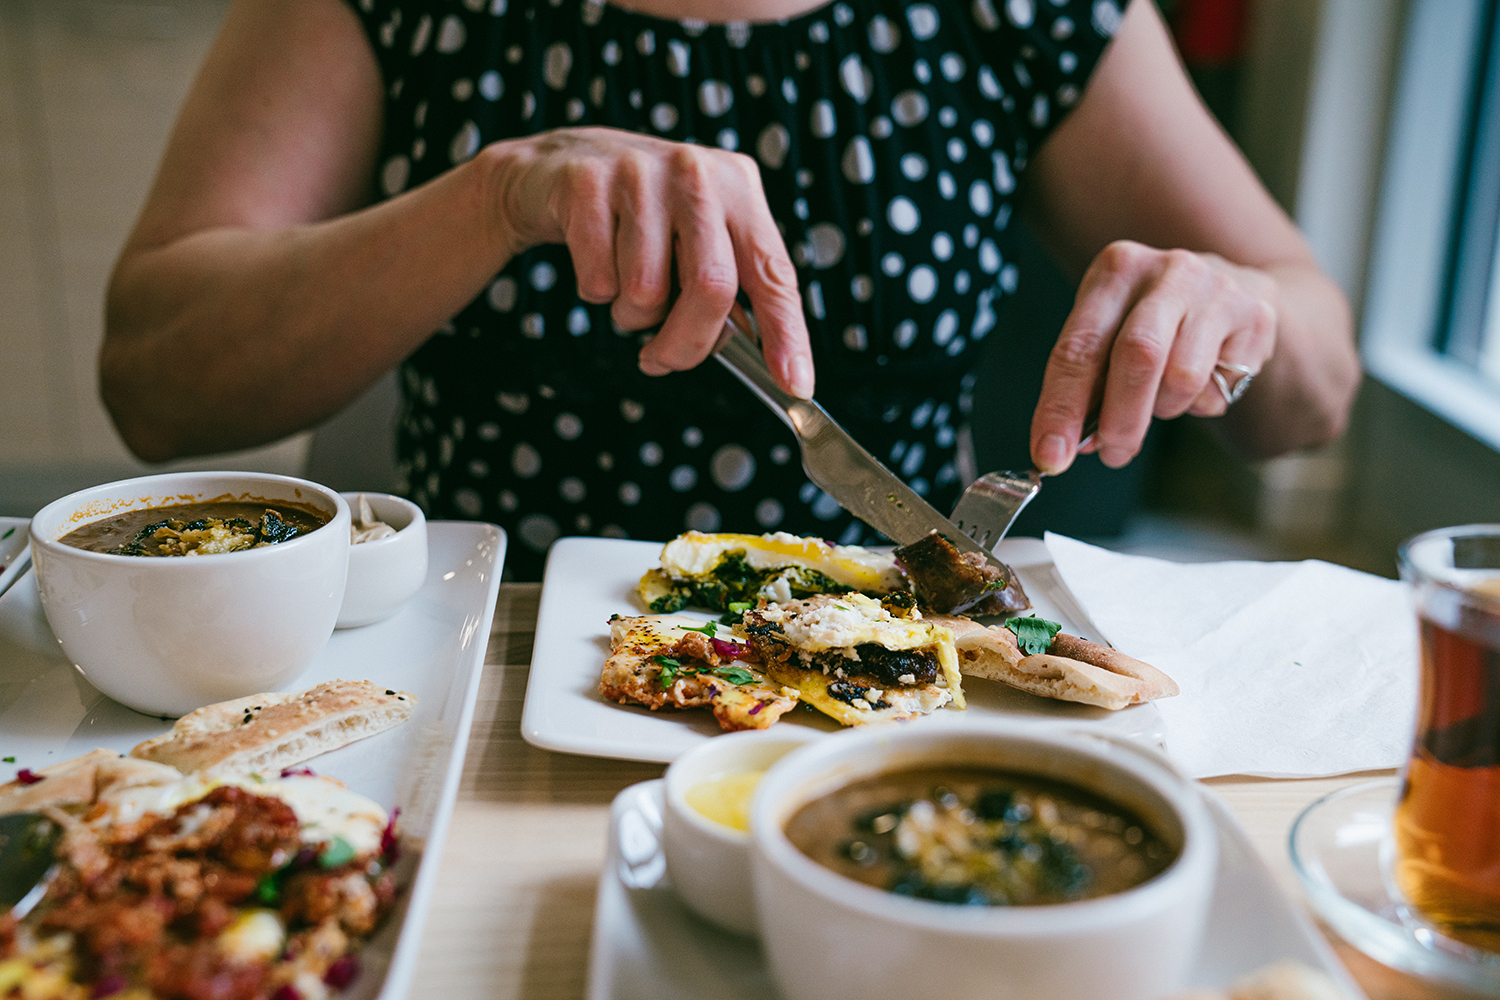 A woman uses her fork and knife to cut into a weekend brunch at Botte Chai Bar in Saskatoon Saskatchewan.